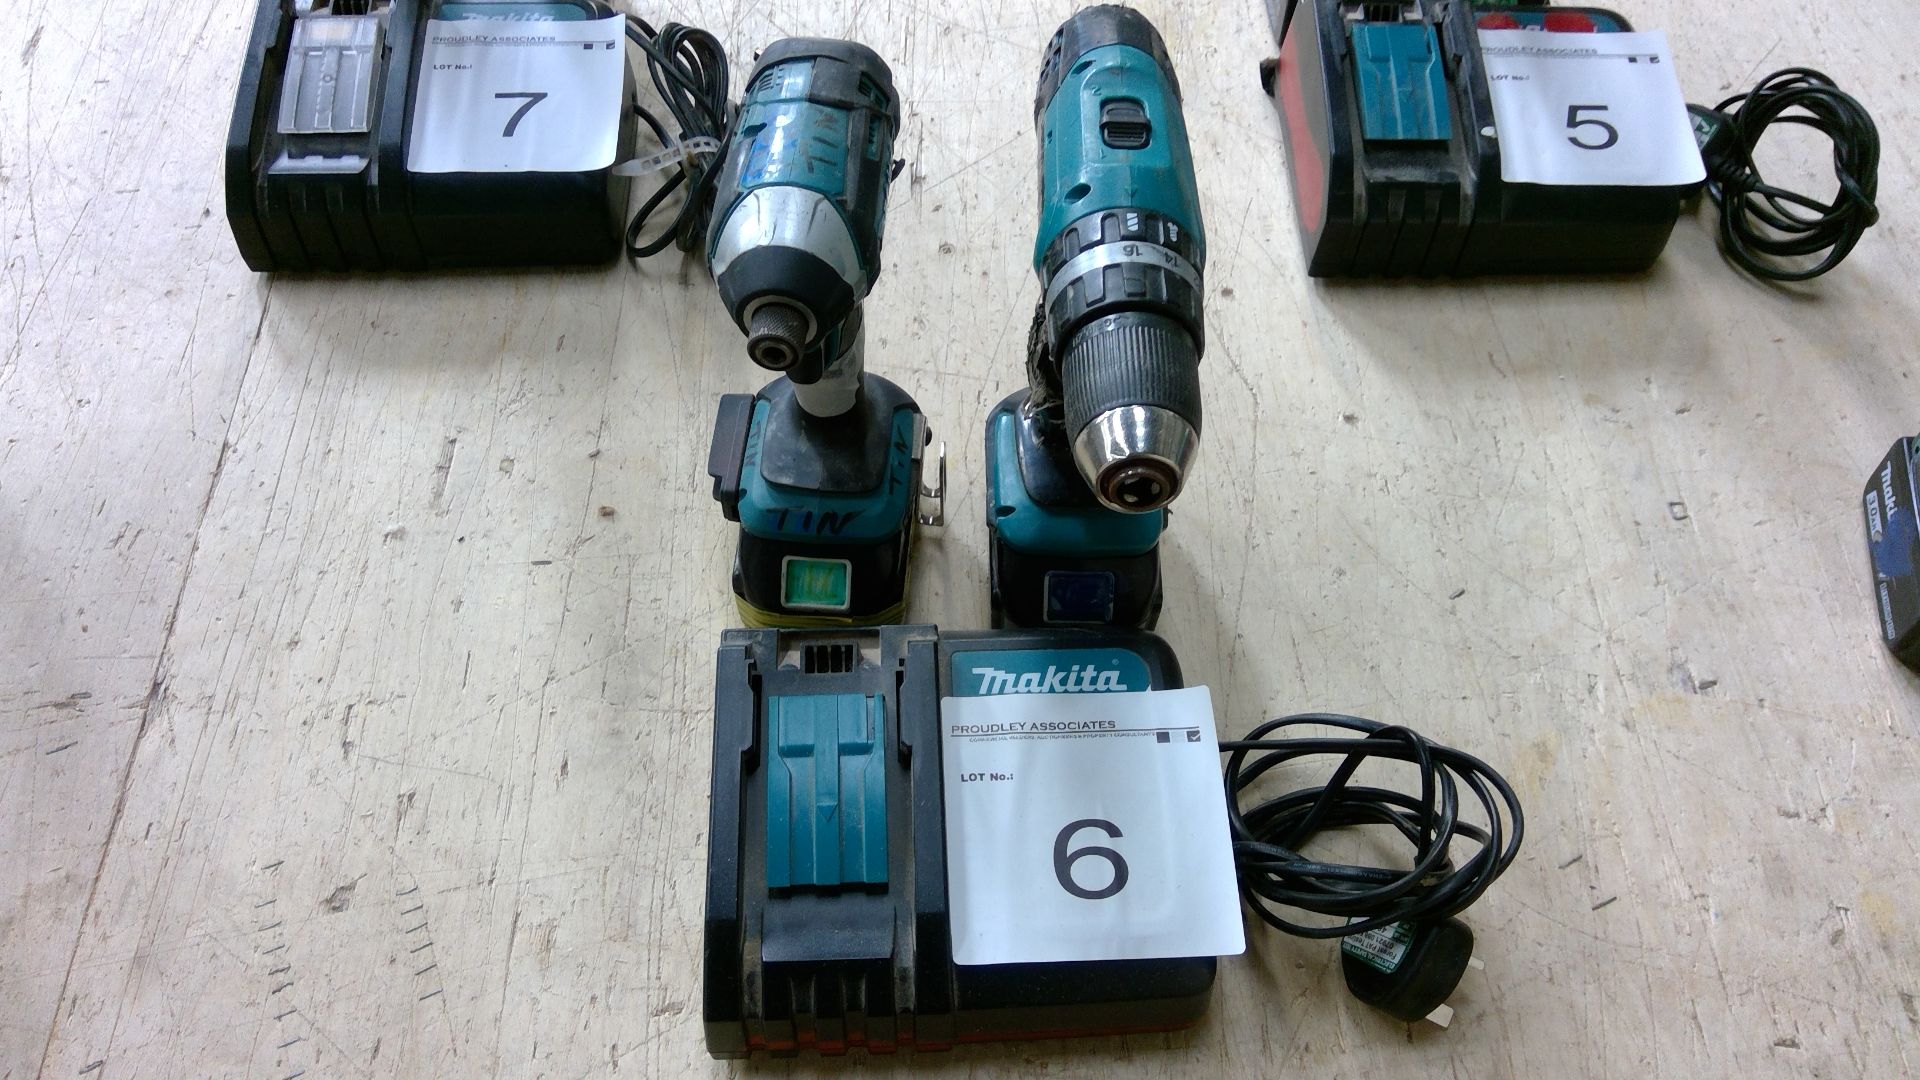 Makita LXT 18v cordless drill / driver combo with 2 x 3.0 Ah batteries and charger